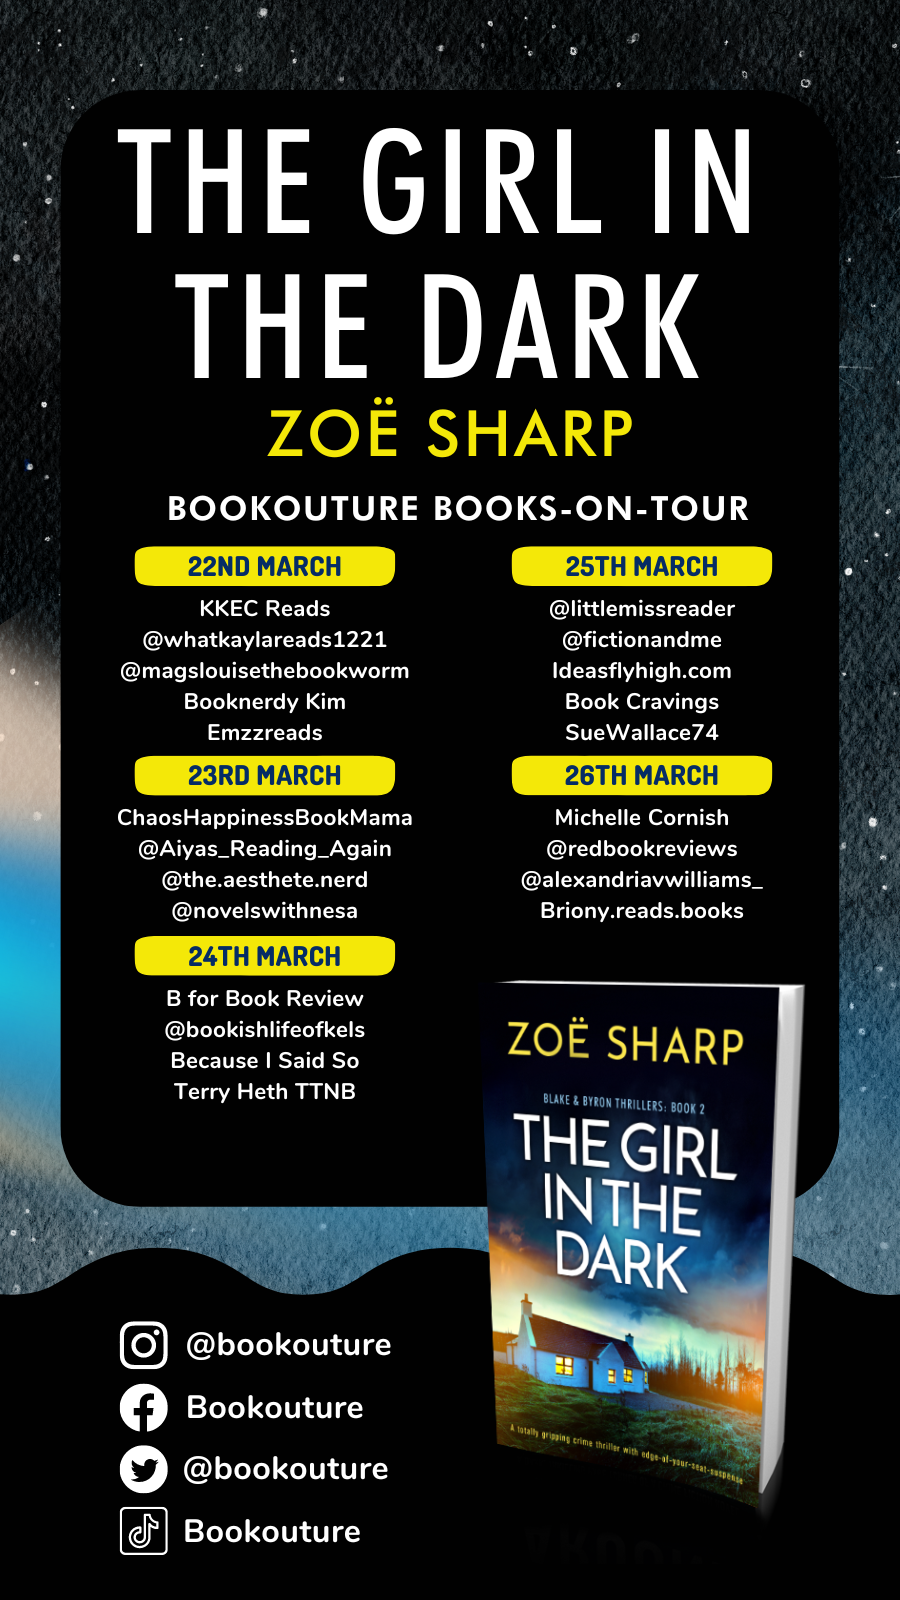 Blog Tour for The Girl in the Dark by Zoe Sharp